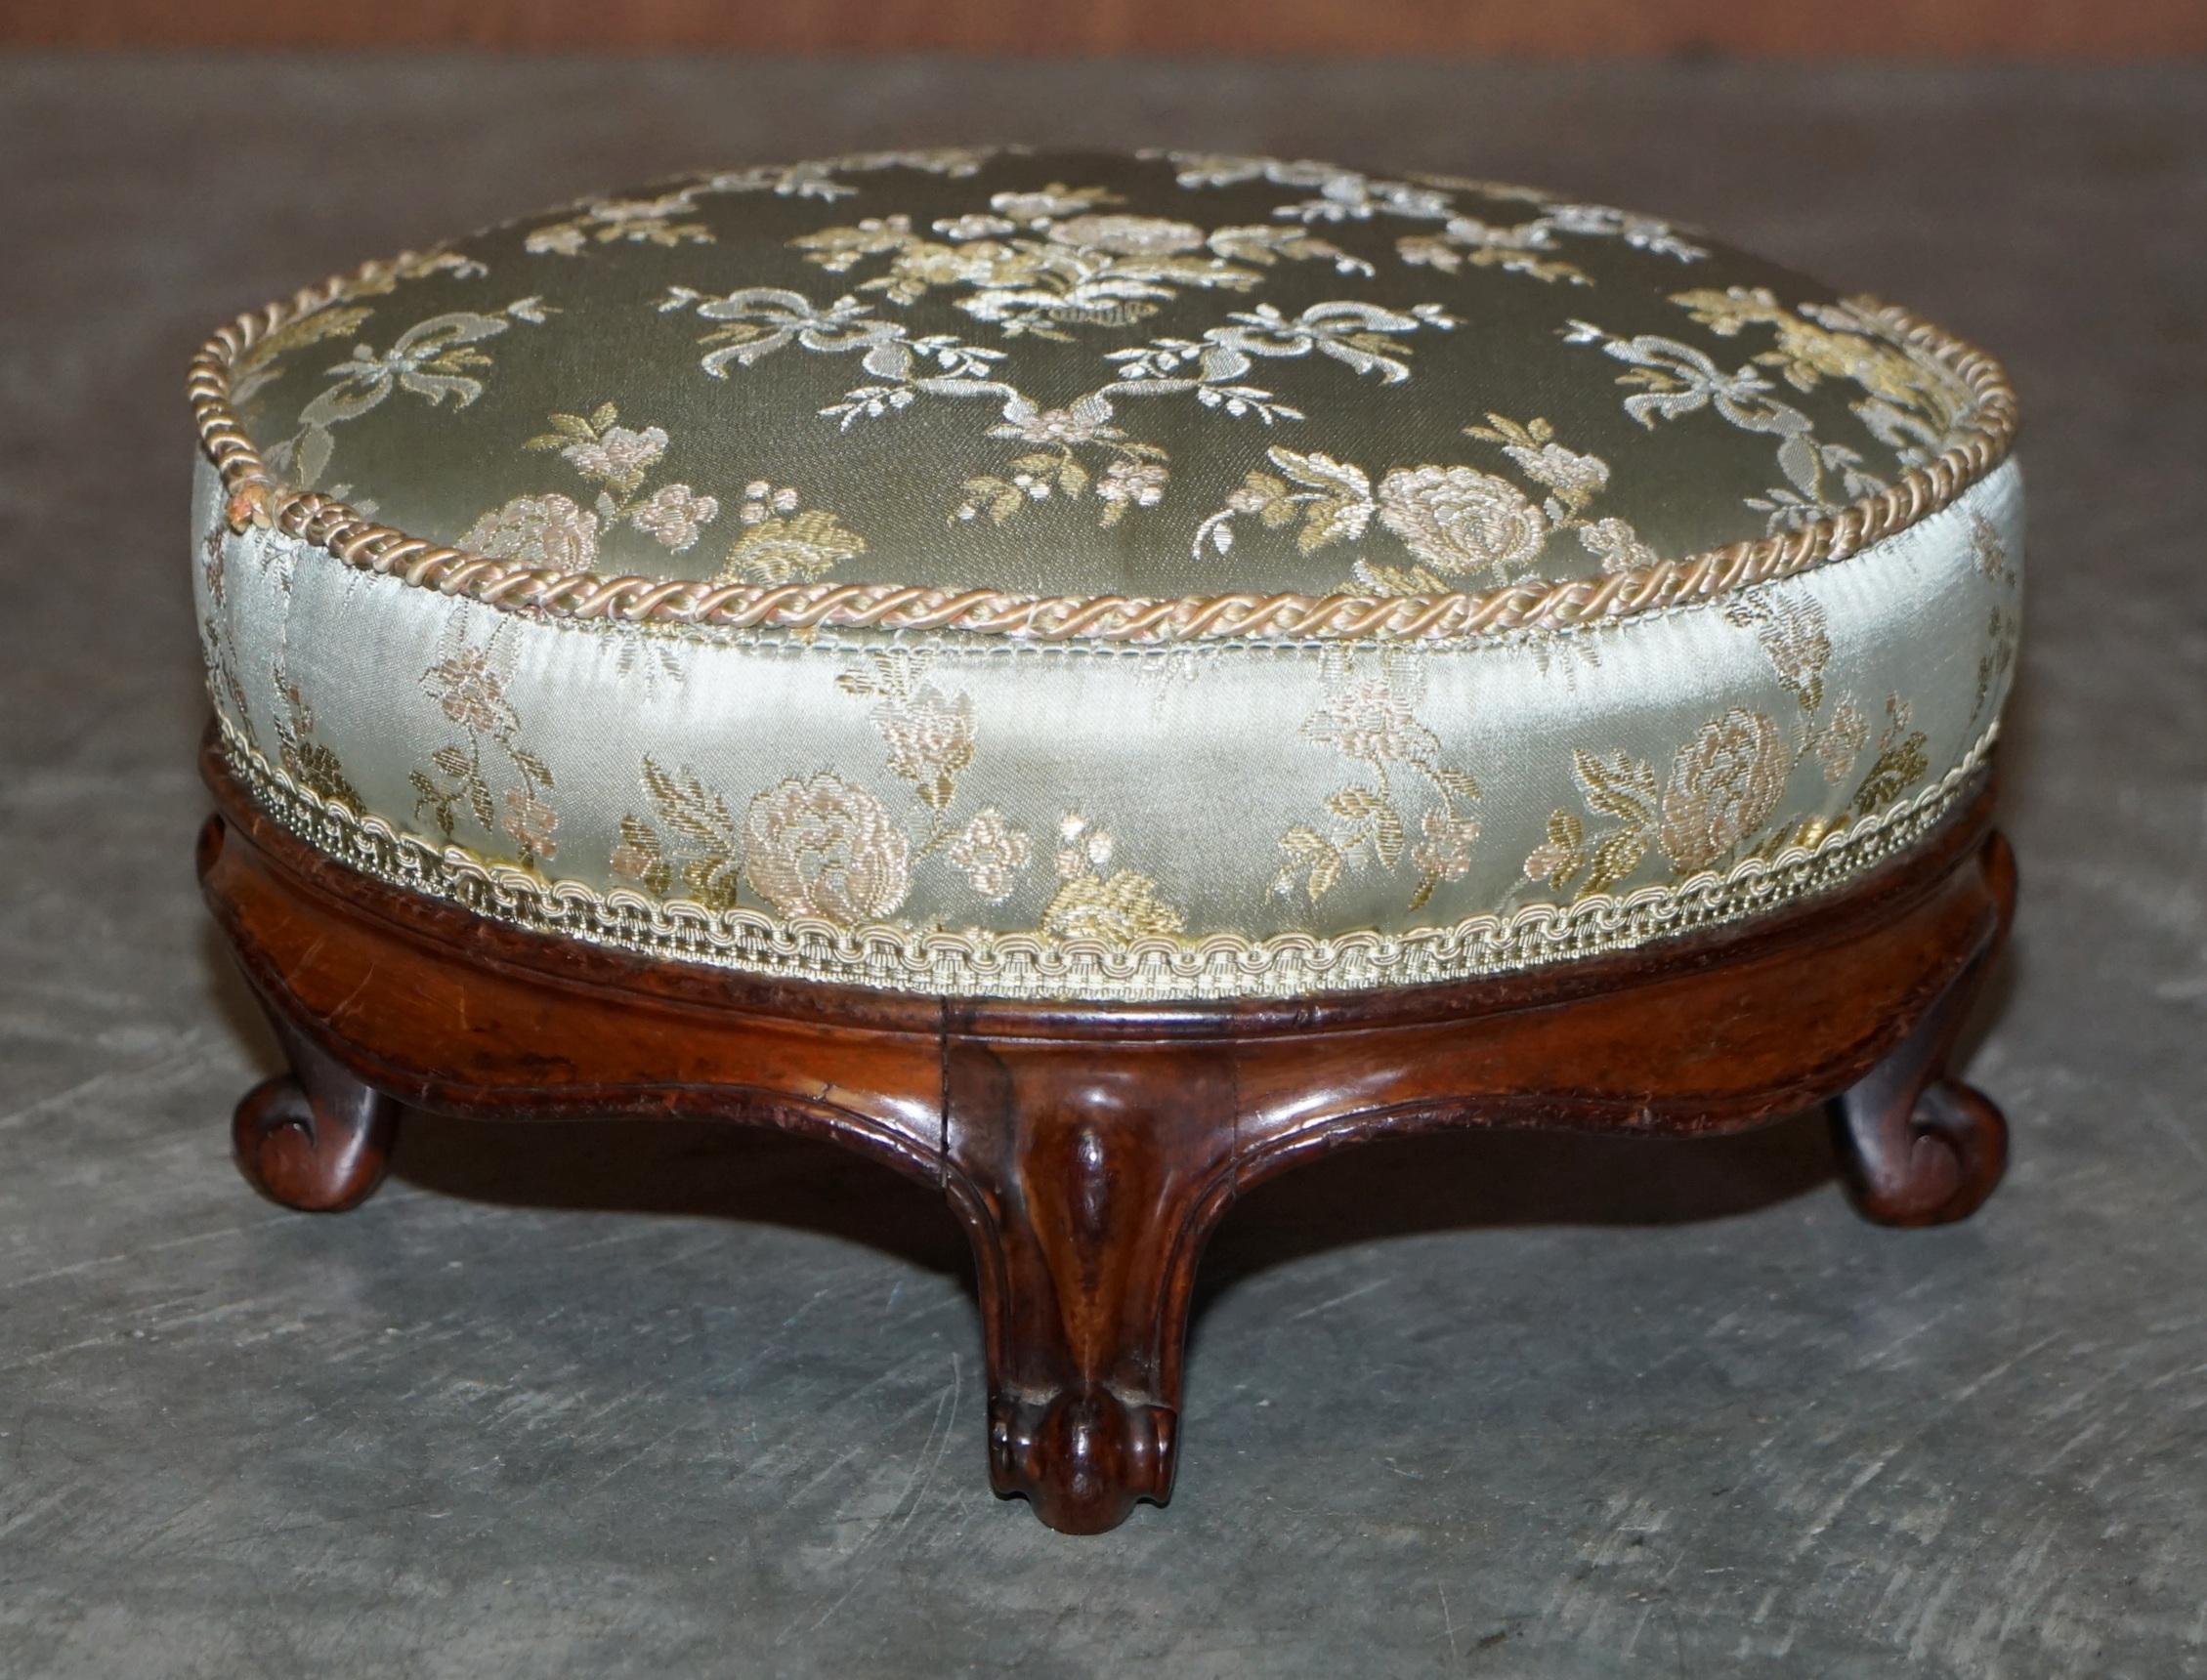 Antique Pair of Regency Hardwood Round Footstools Silk Embroidered Upholstery 1